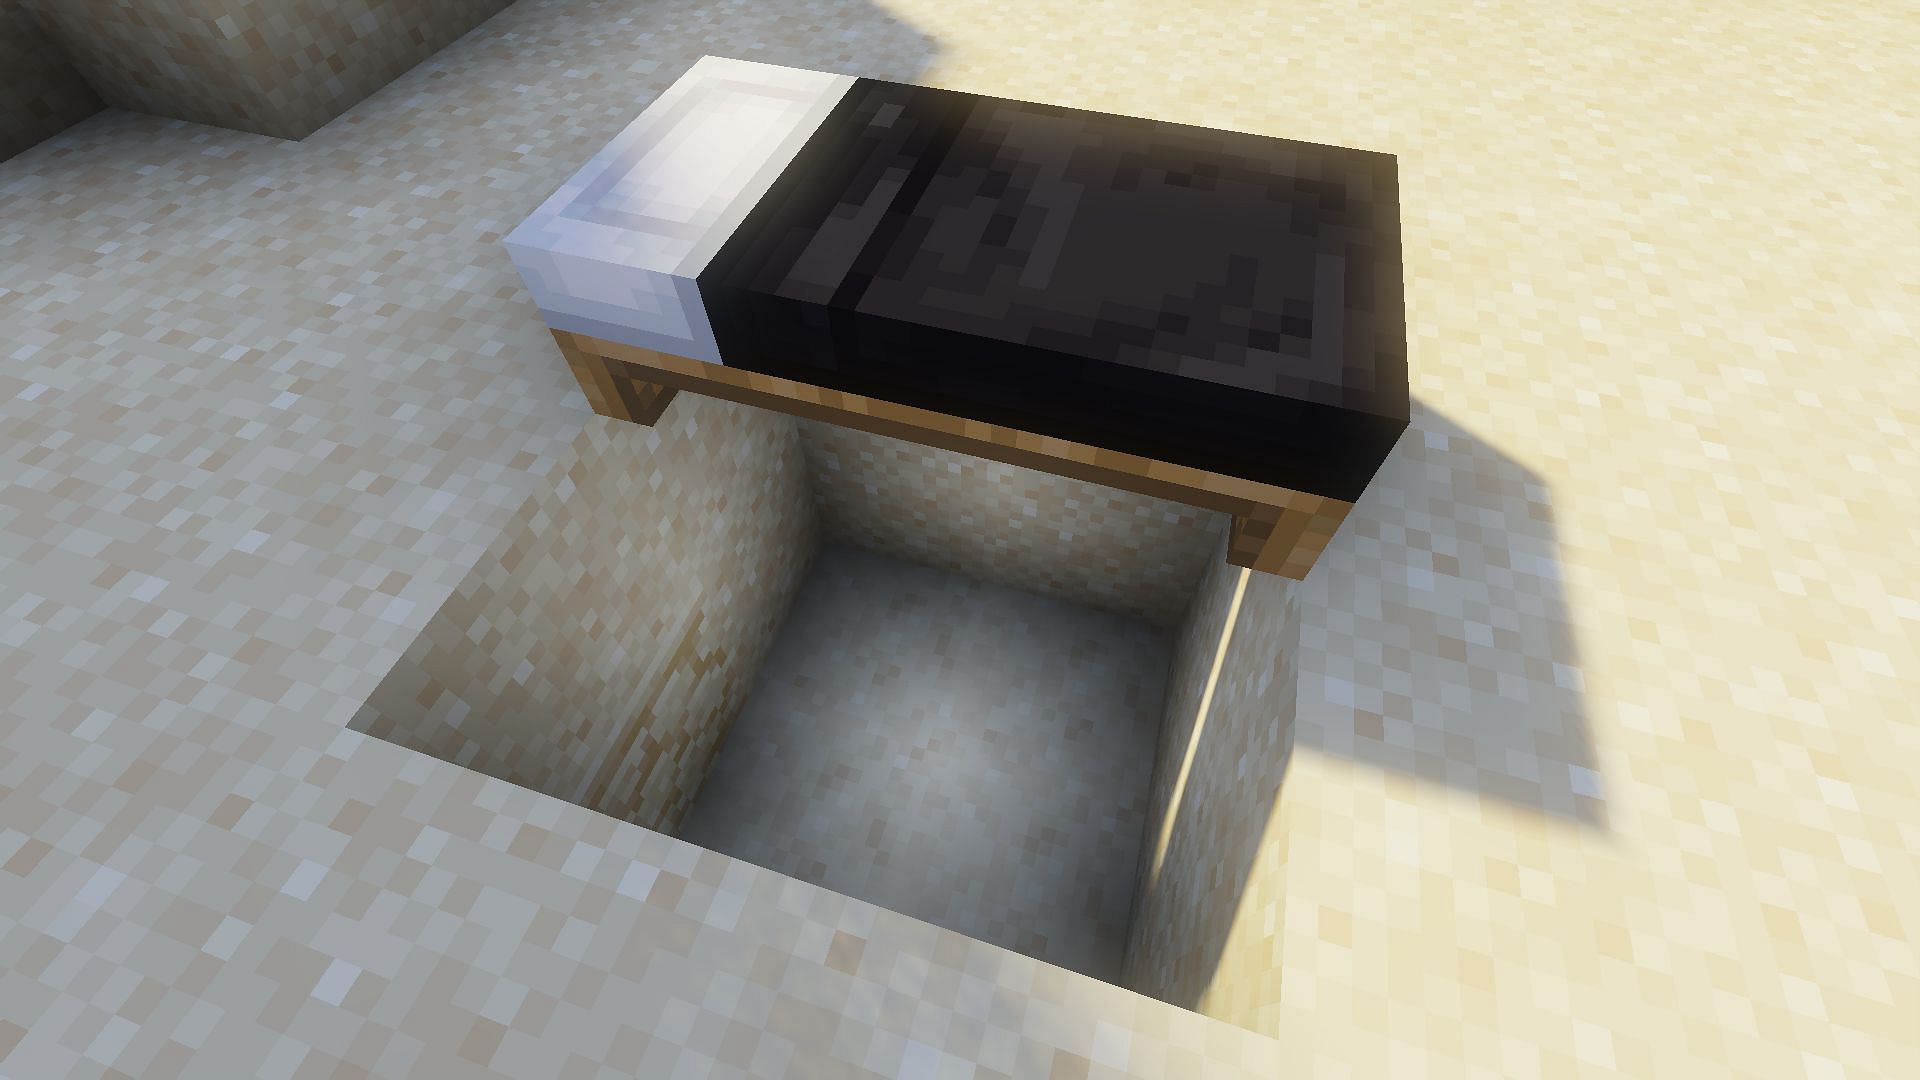 The smallest area needed for a bed trap (Image via Minecraft)